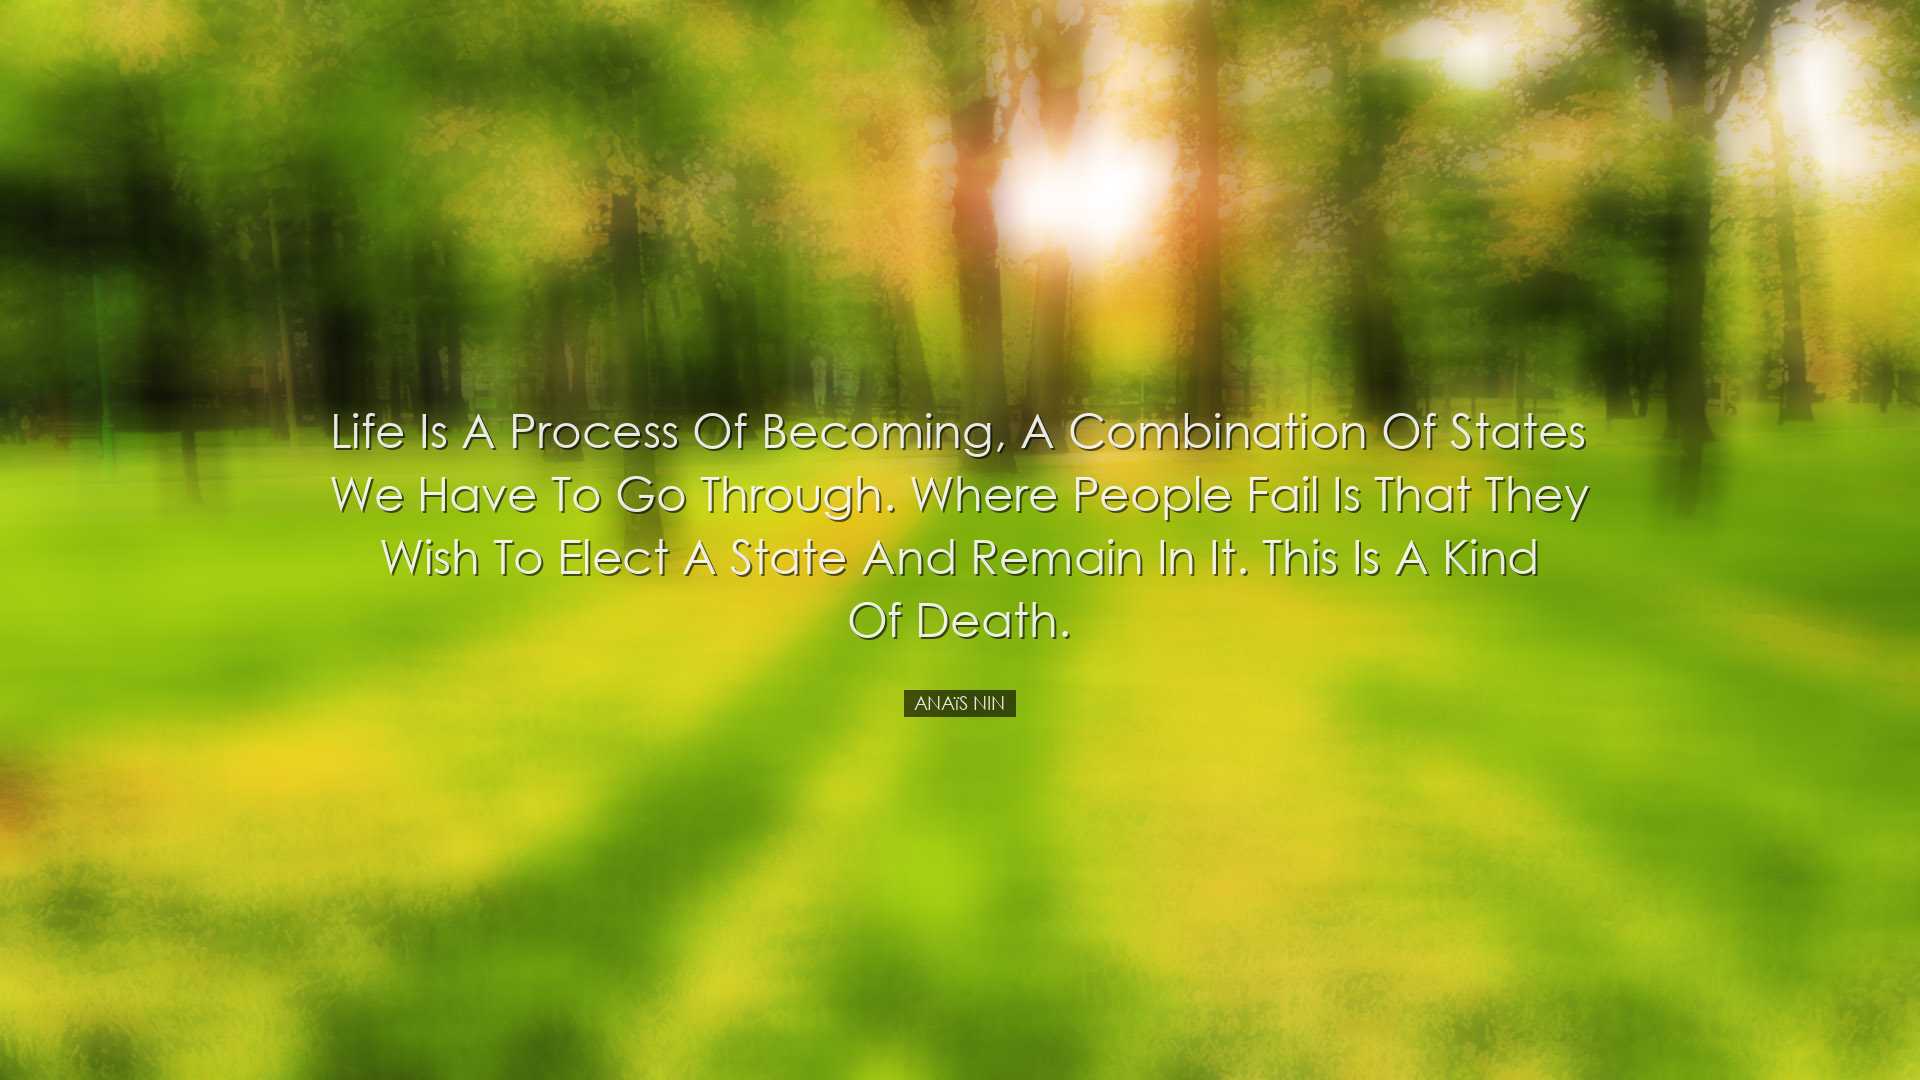 Life is a process of becoming, a combination of states we have to